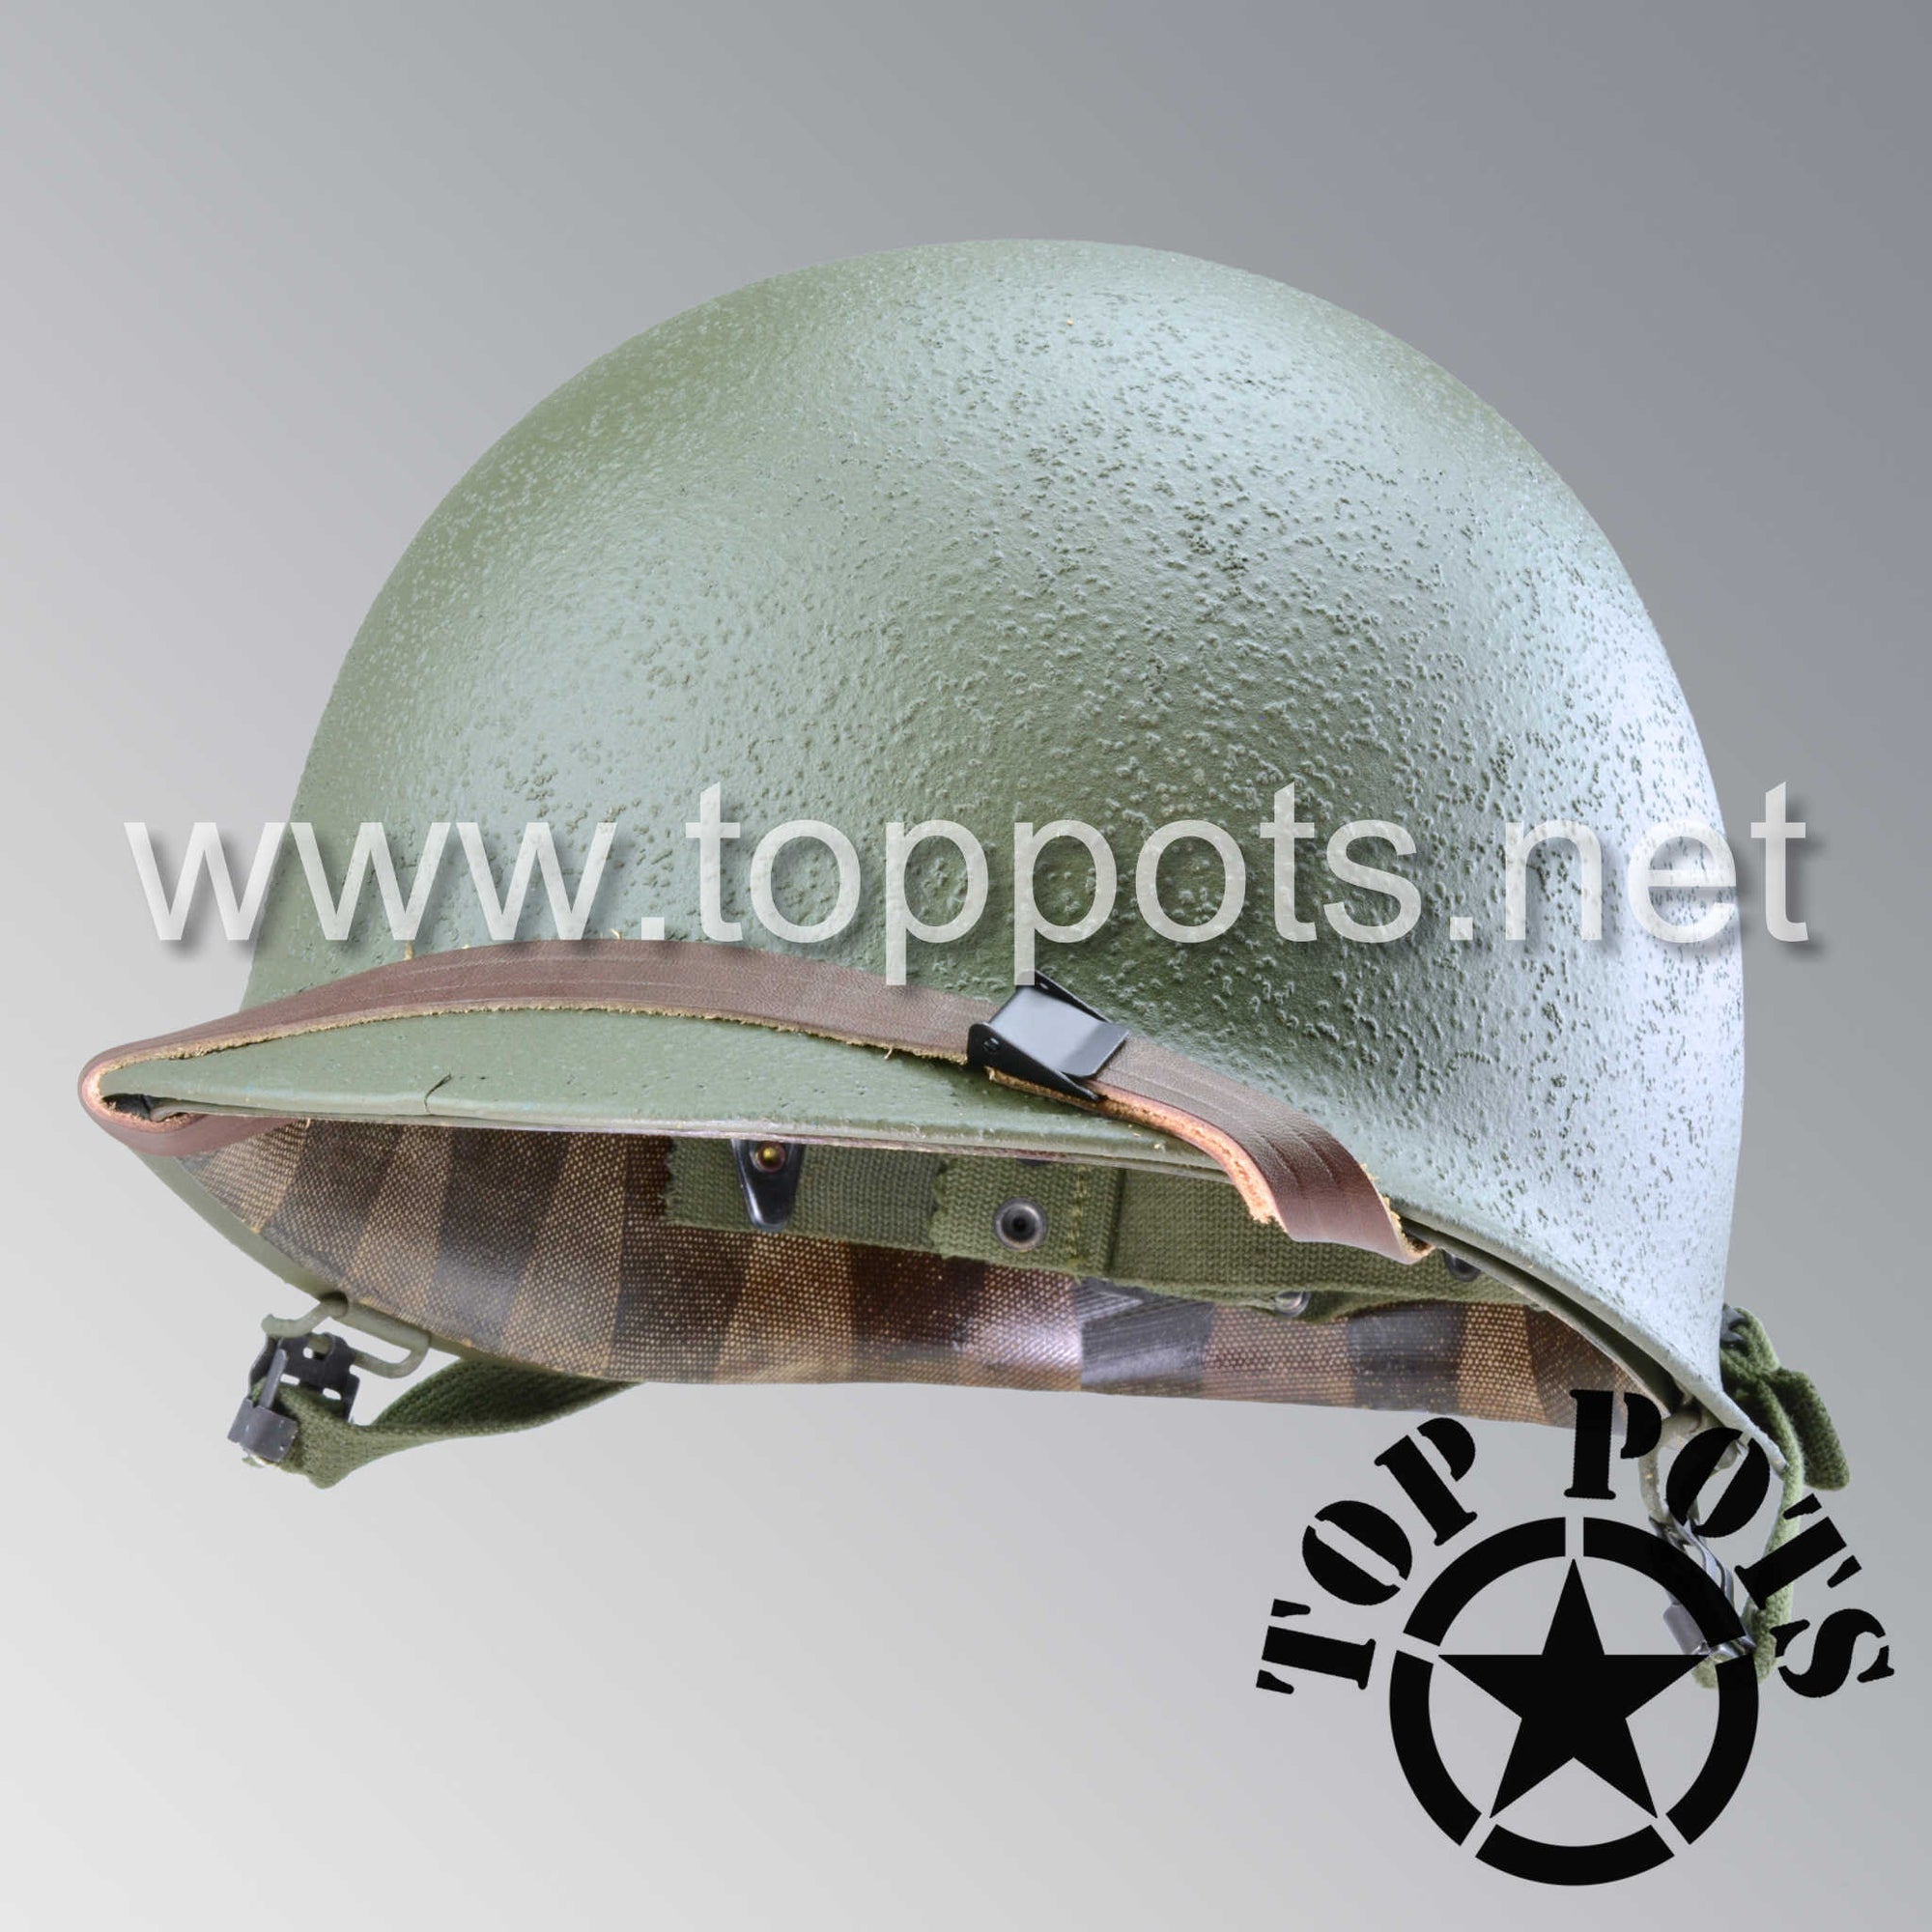 Korean War US Army Restored Original M1 Infantry Helmet Swivel Bale Shell and Liner with T1 Chinstraps